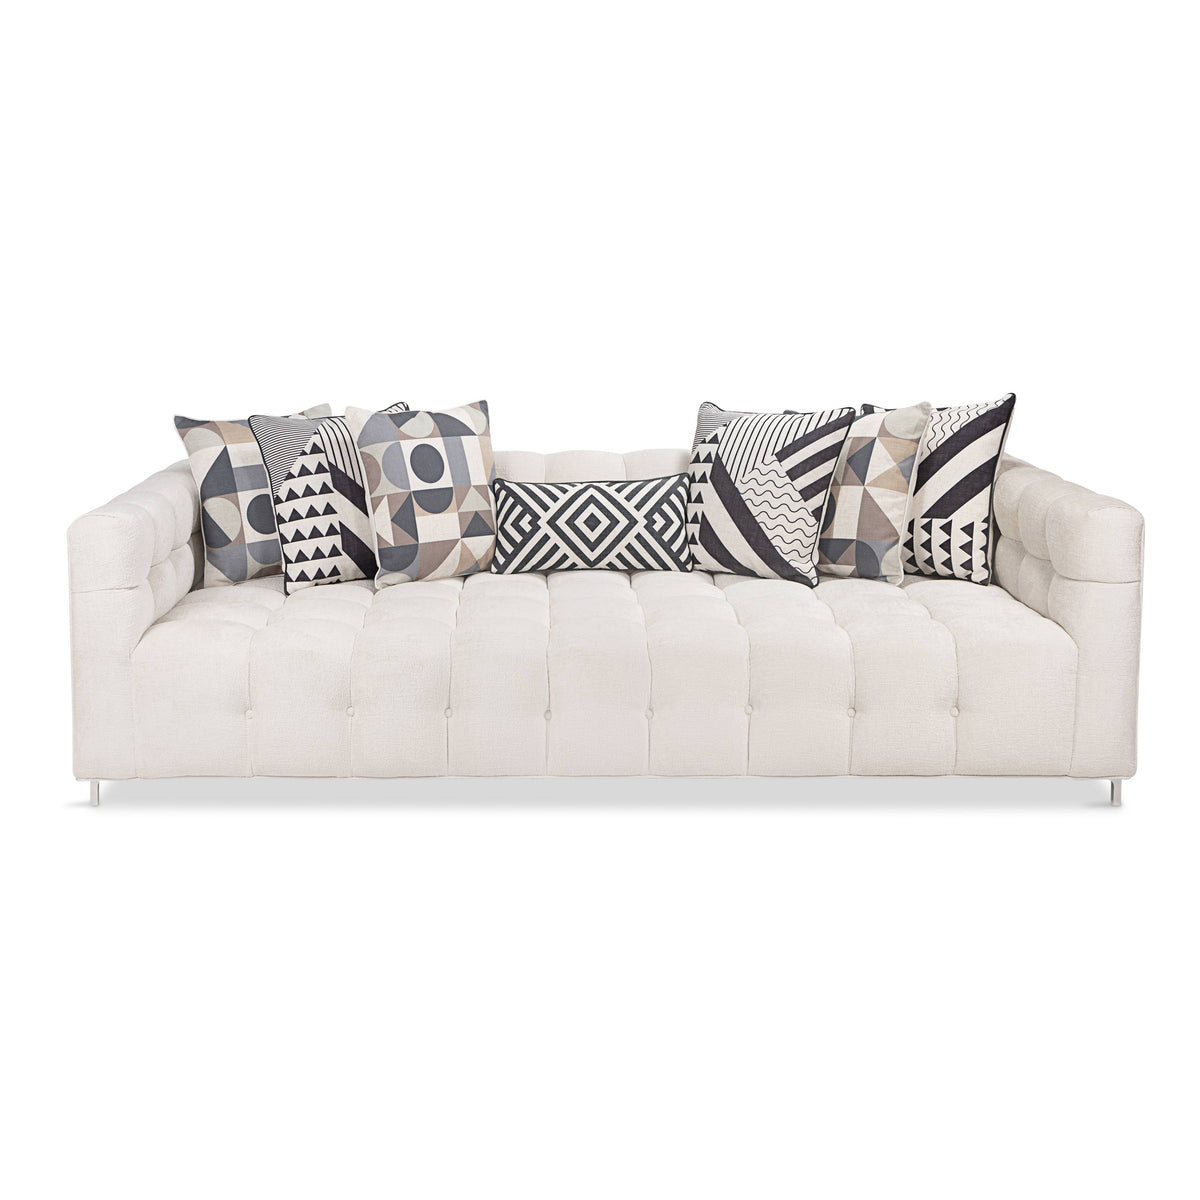 Delano Extra Deep Sofa in Hammered Velour